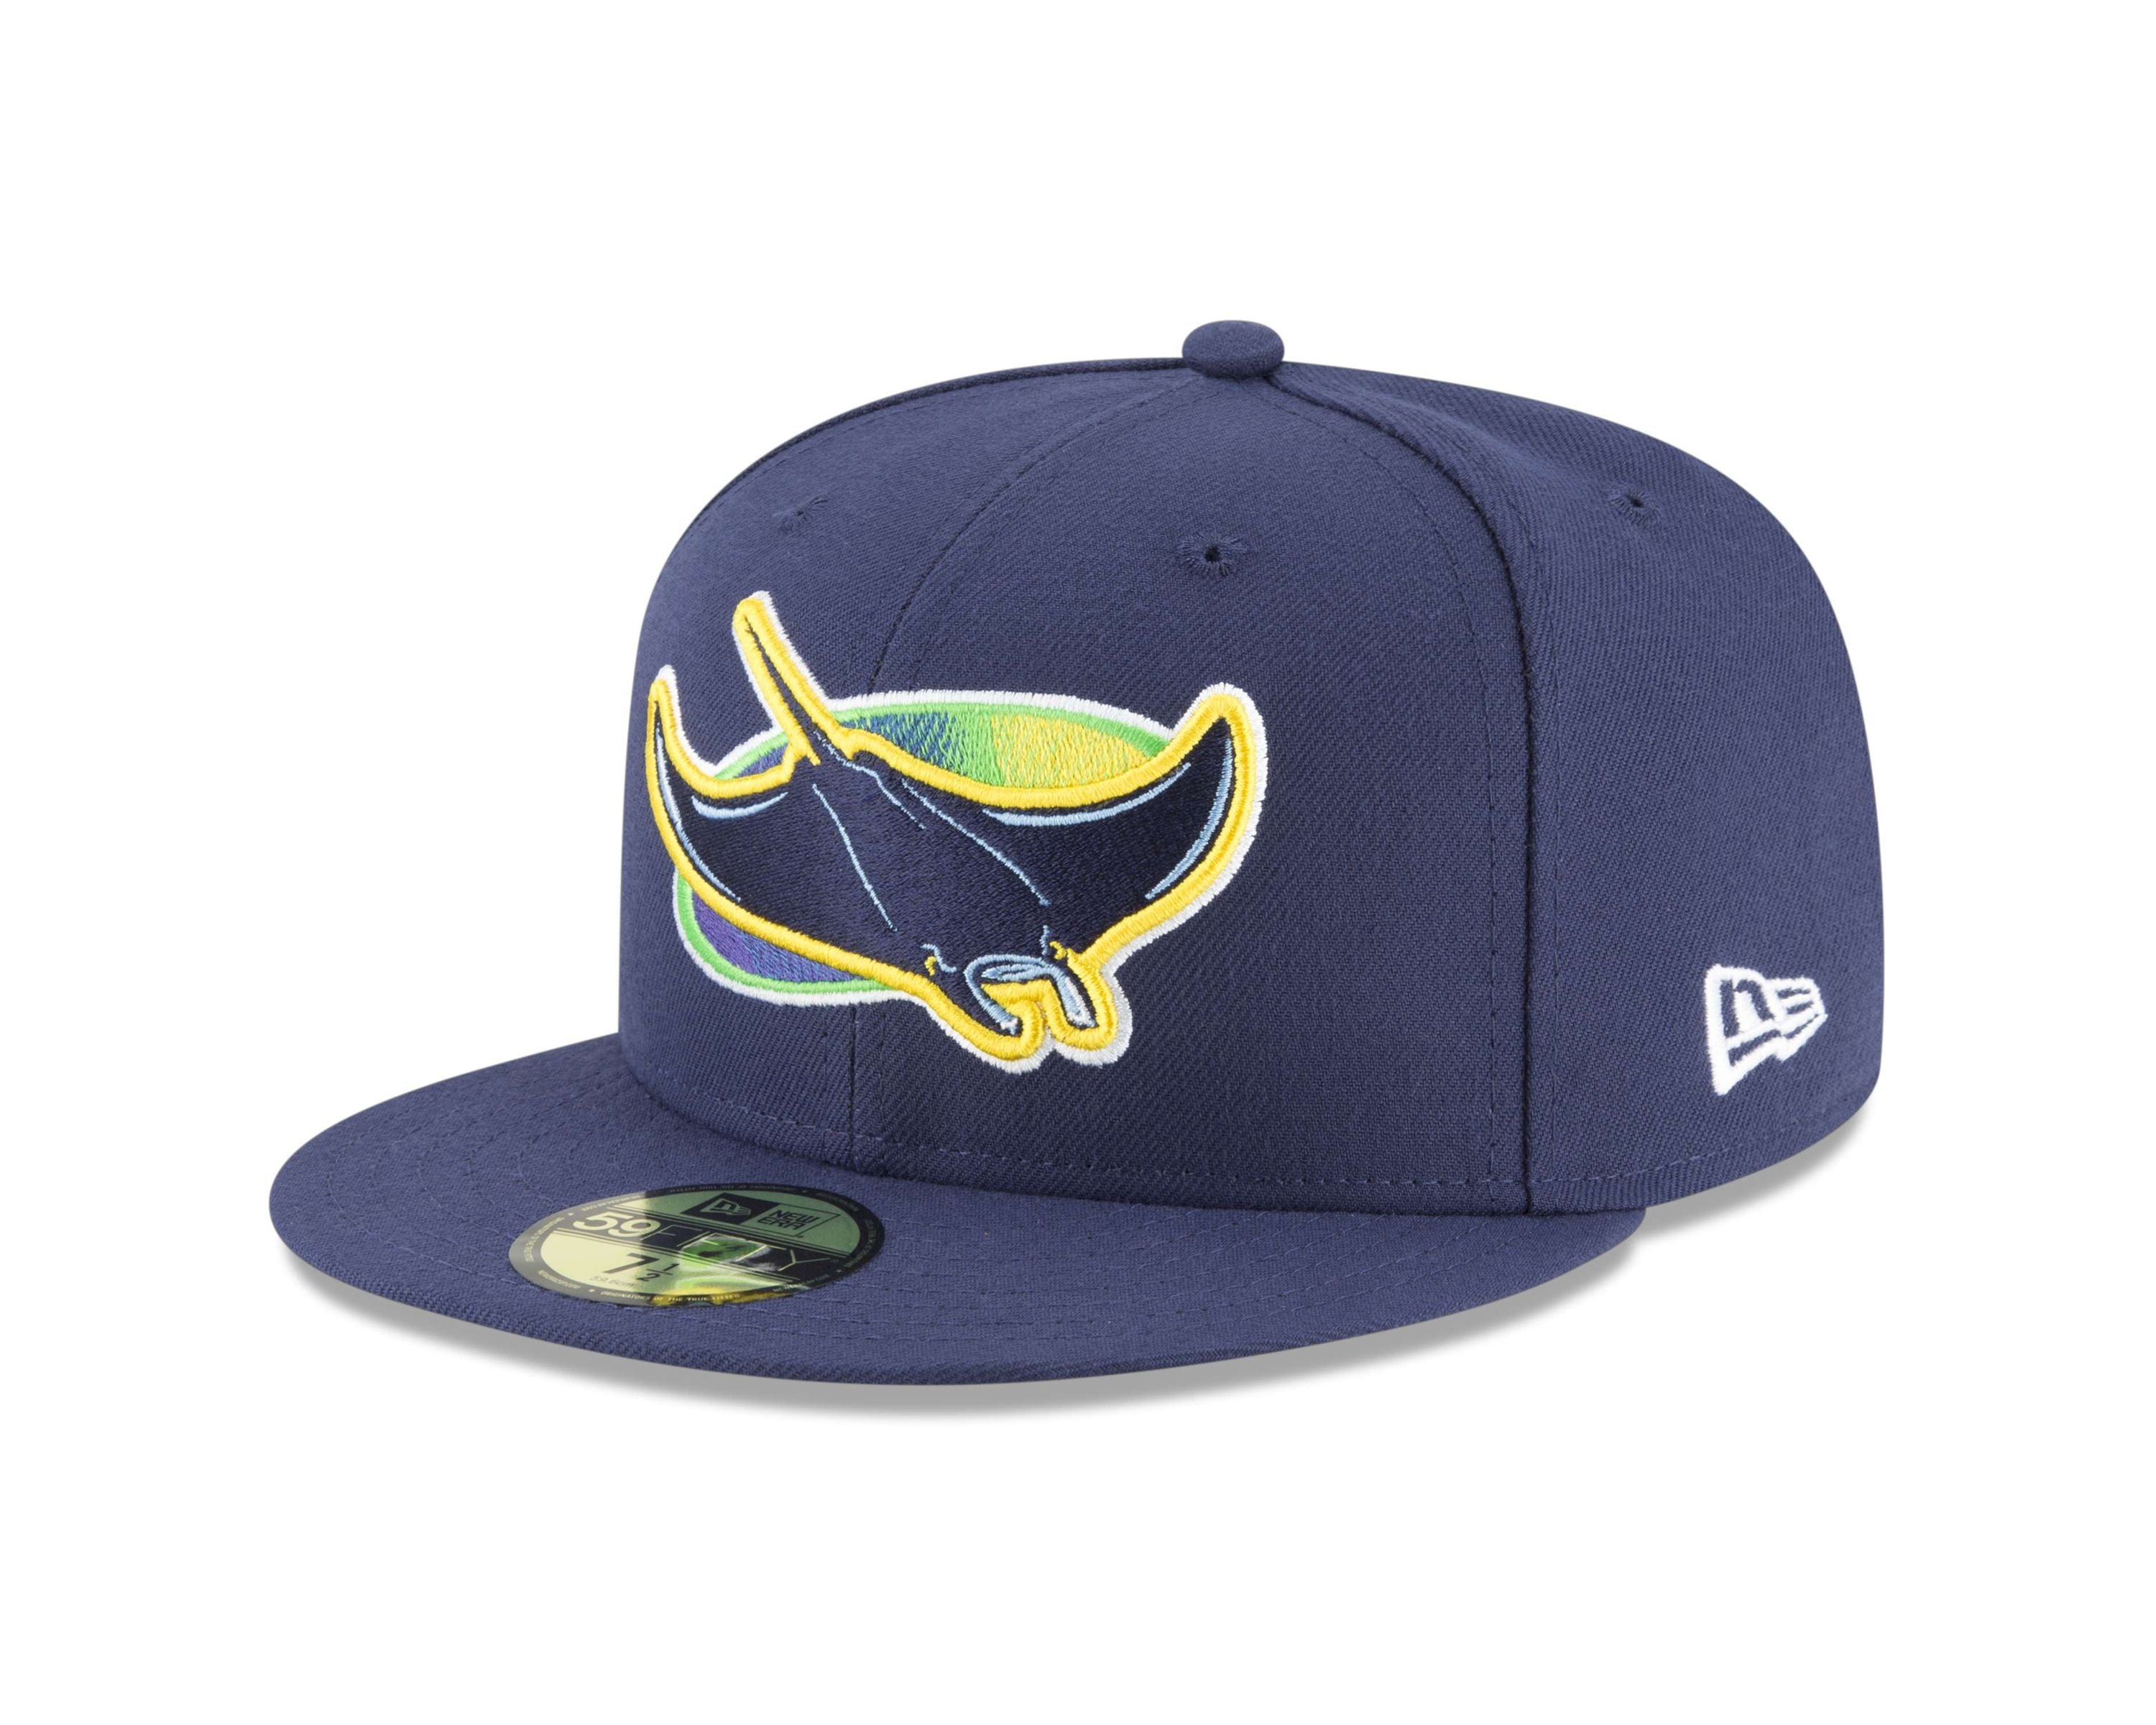 New Era - MLB Tampa Bay Rays Authentic Collection Alternate Fitted Cap -